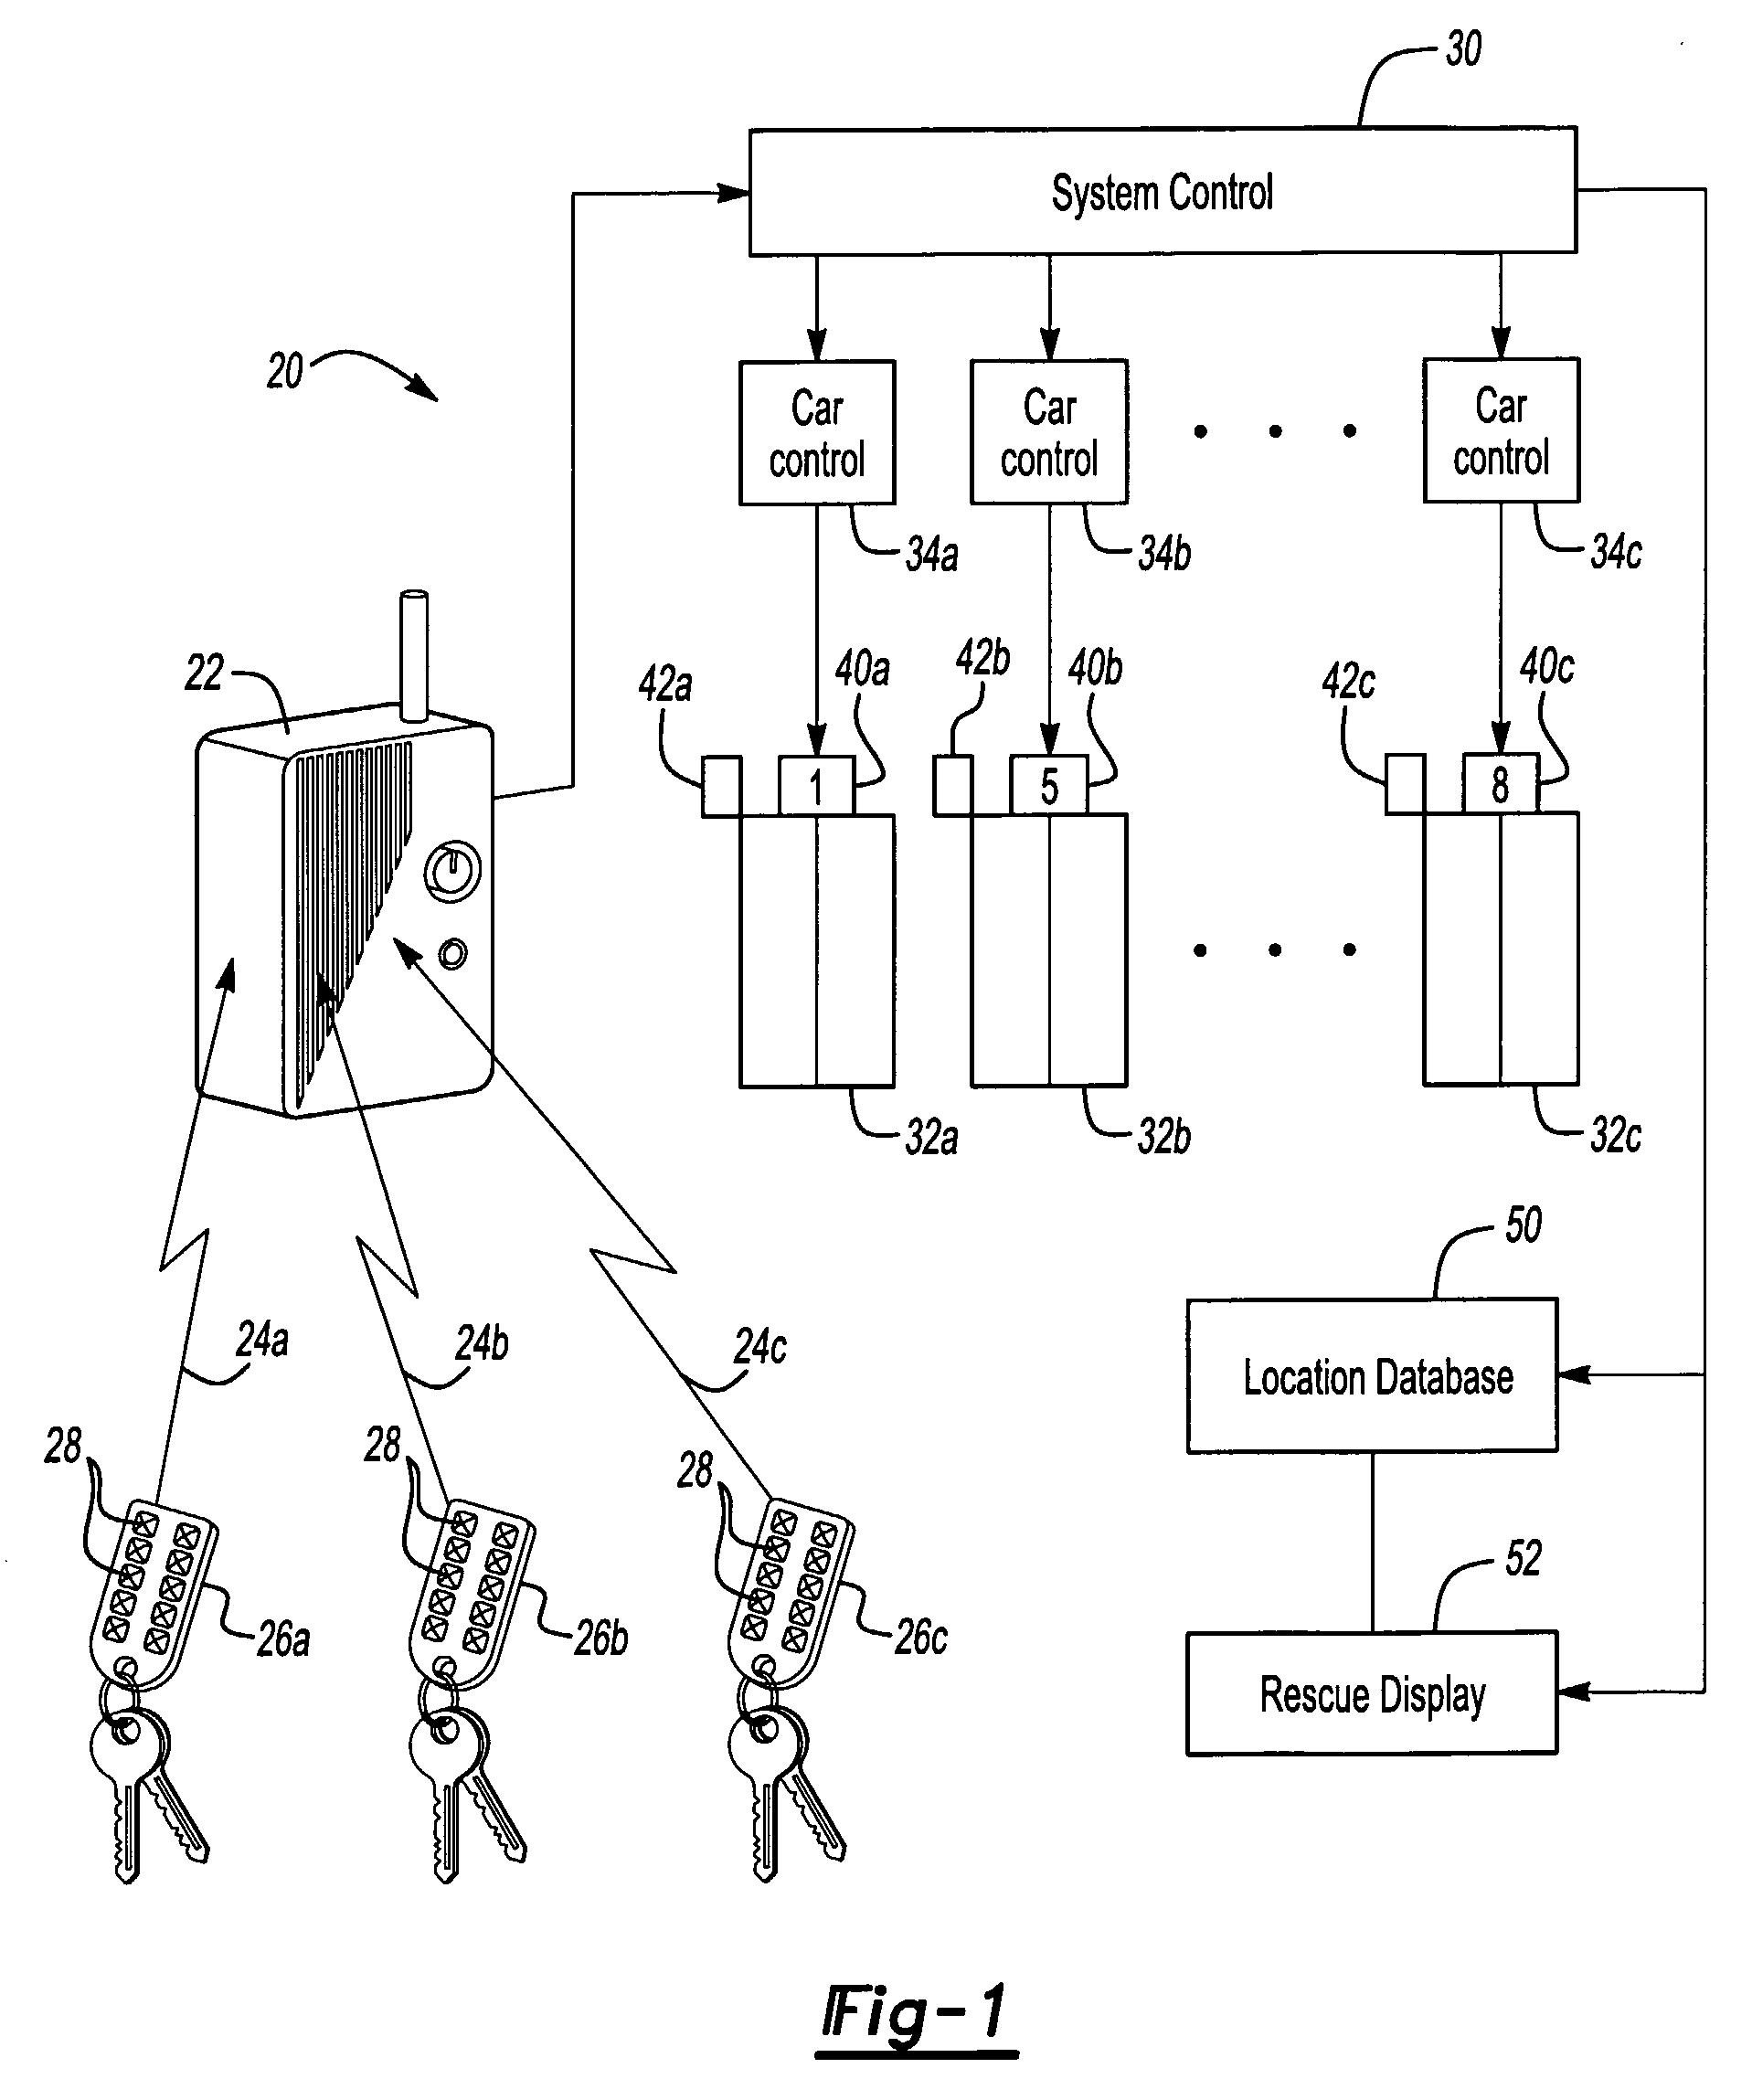 Elevator system control providing specialized service features to facilitate a passenger accessing an assigned elevator car